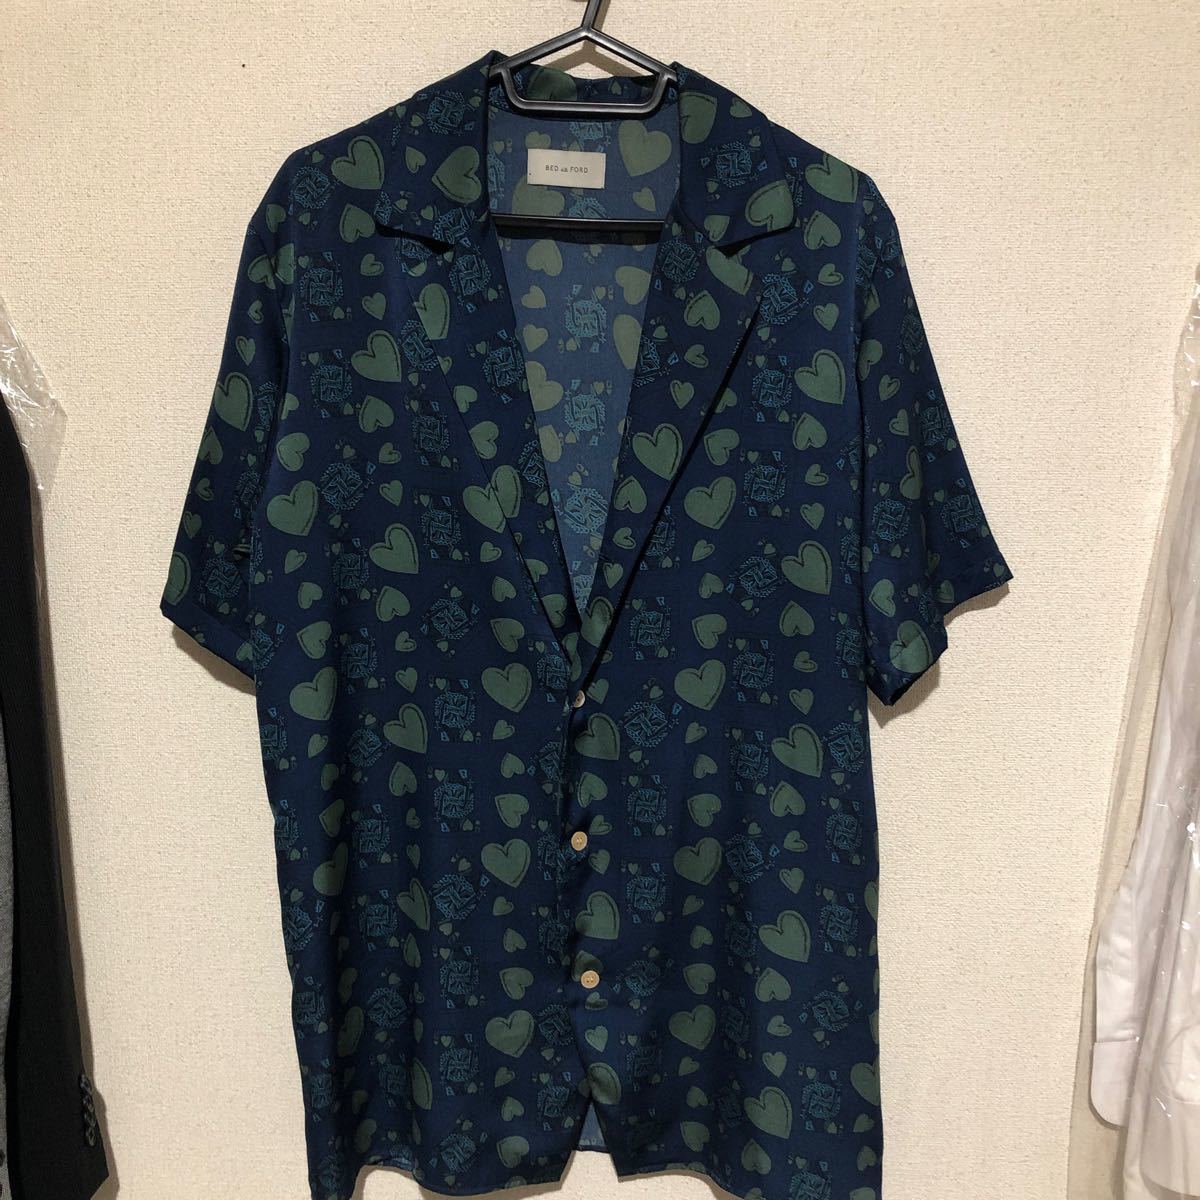 BED J.W. FORD Queen shirt お買い得